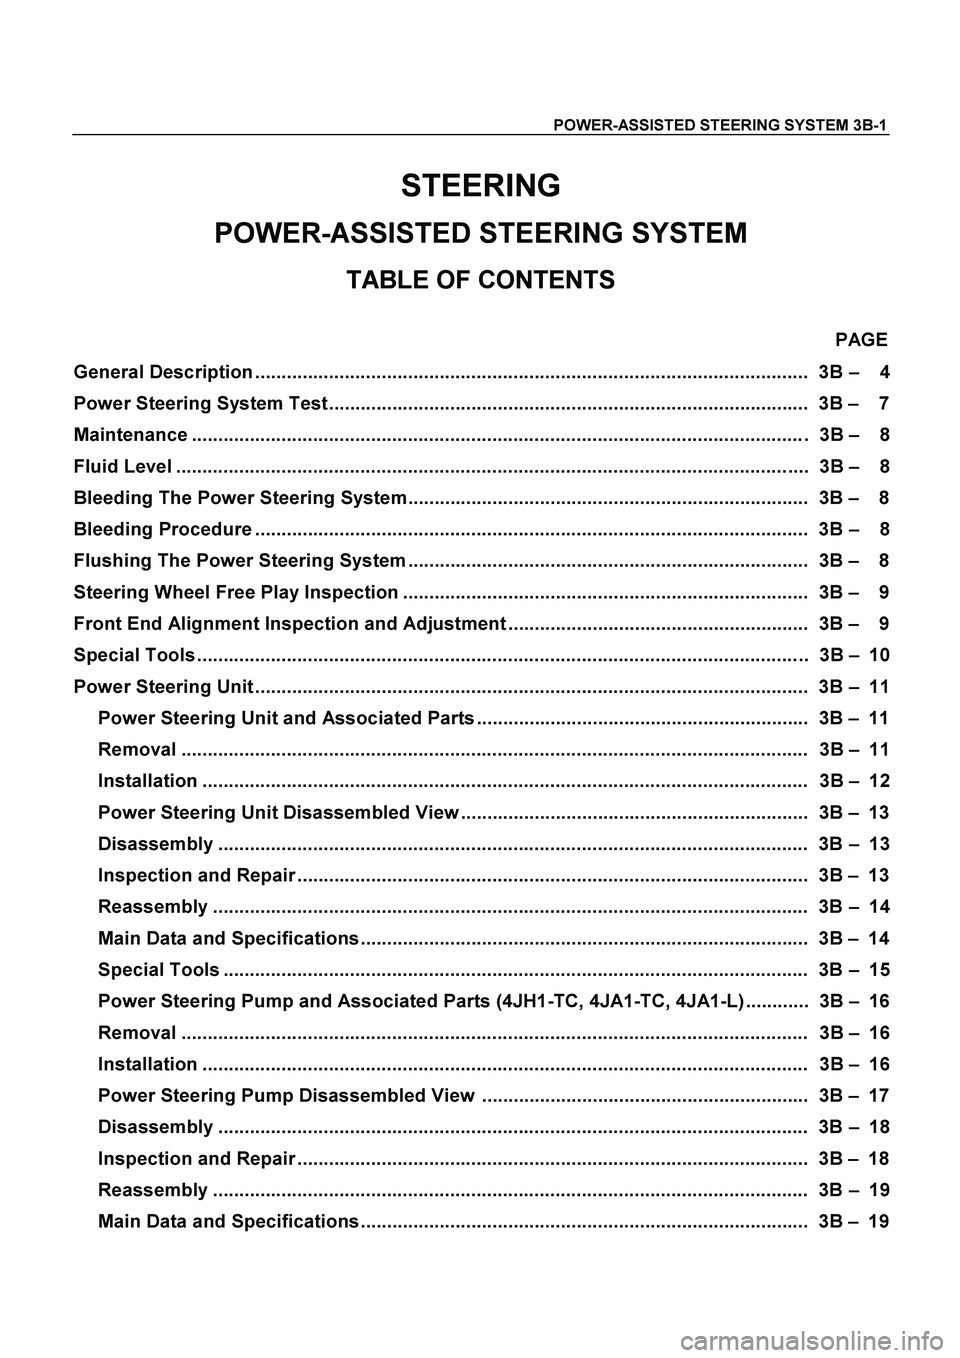 ISUZU TF SERIES 2004  Workshop Manual POWER-ASSISTED STEERING SYSTEM 3B-1
 
STEERING 
POWER-ASSISTED STEERING SYSTEM 
TABLE OF CONTENTS 
 PAGE 
General Description ..........................................................................